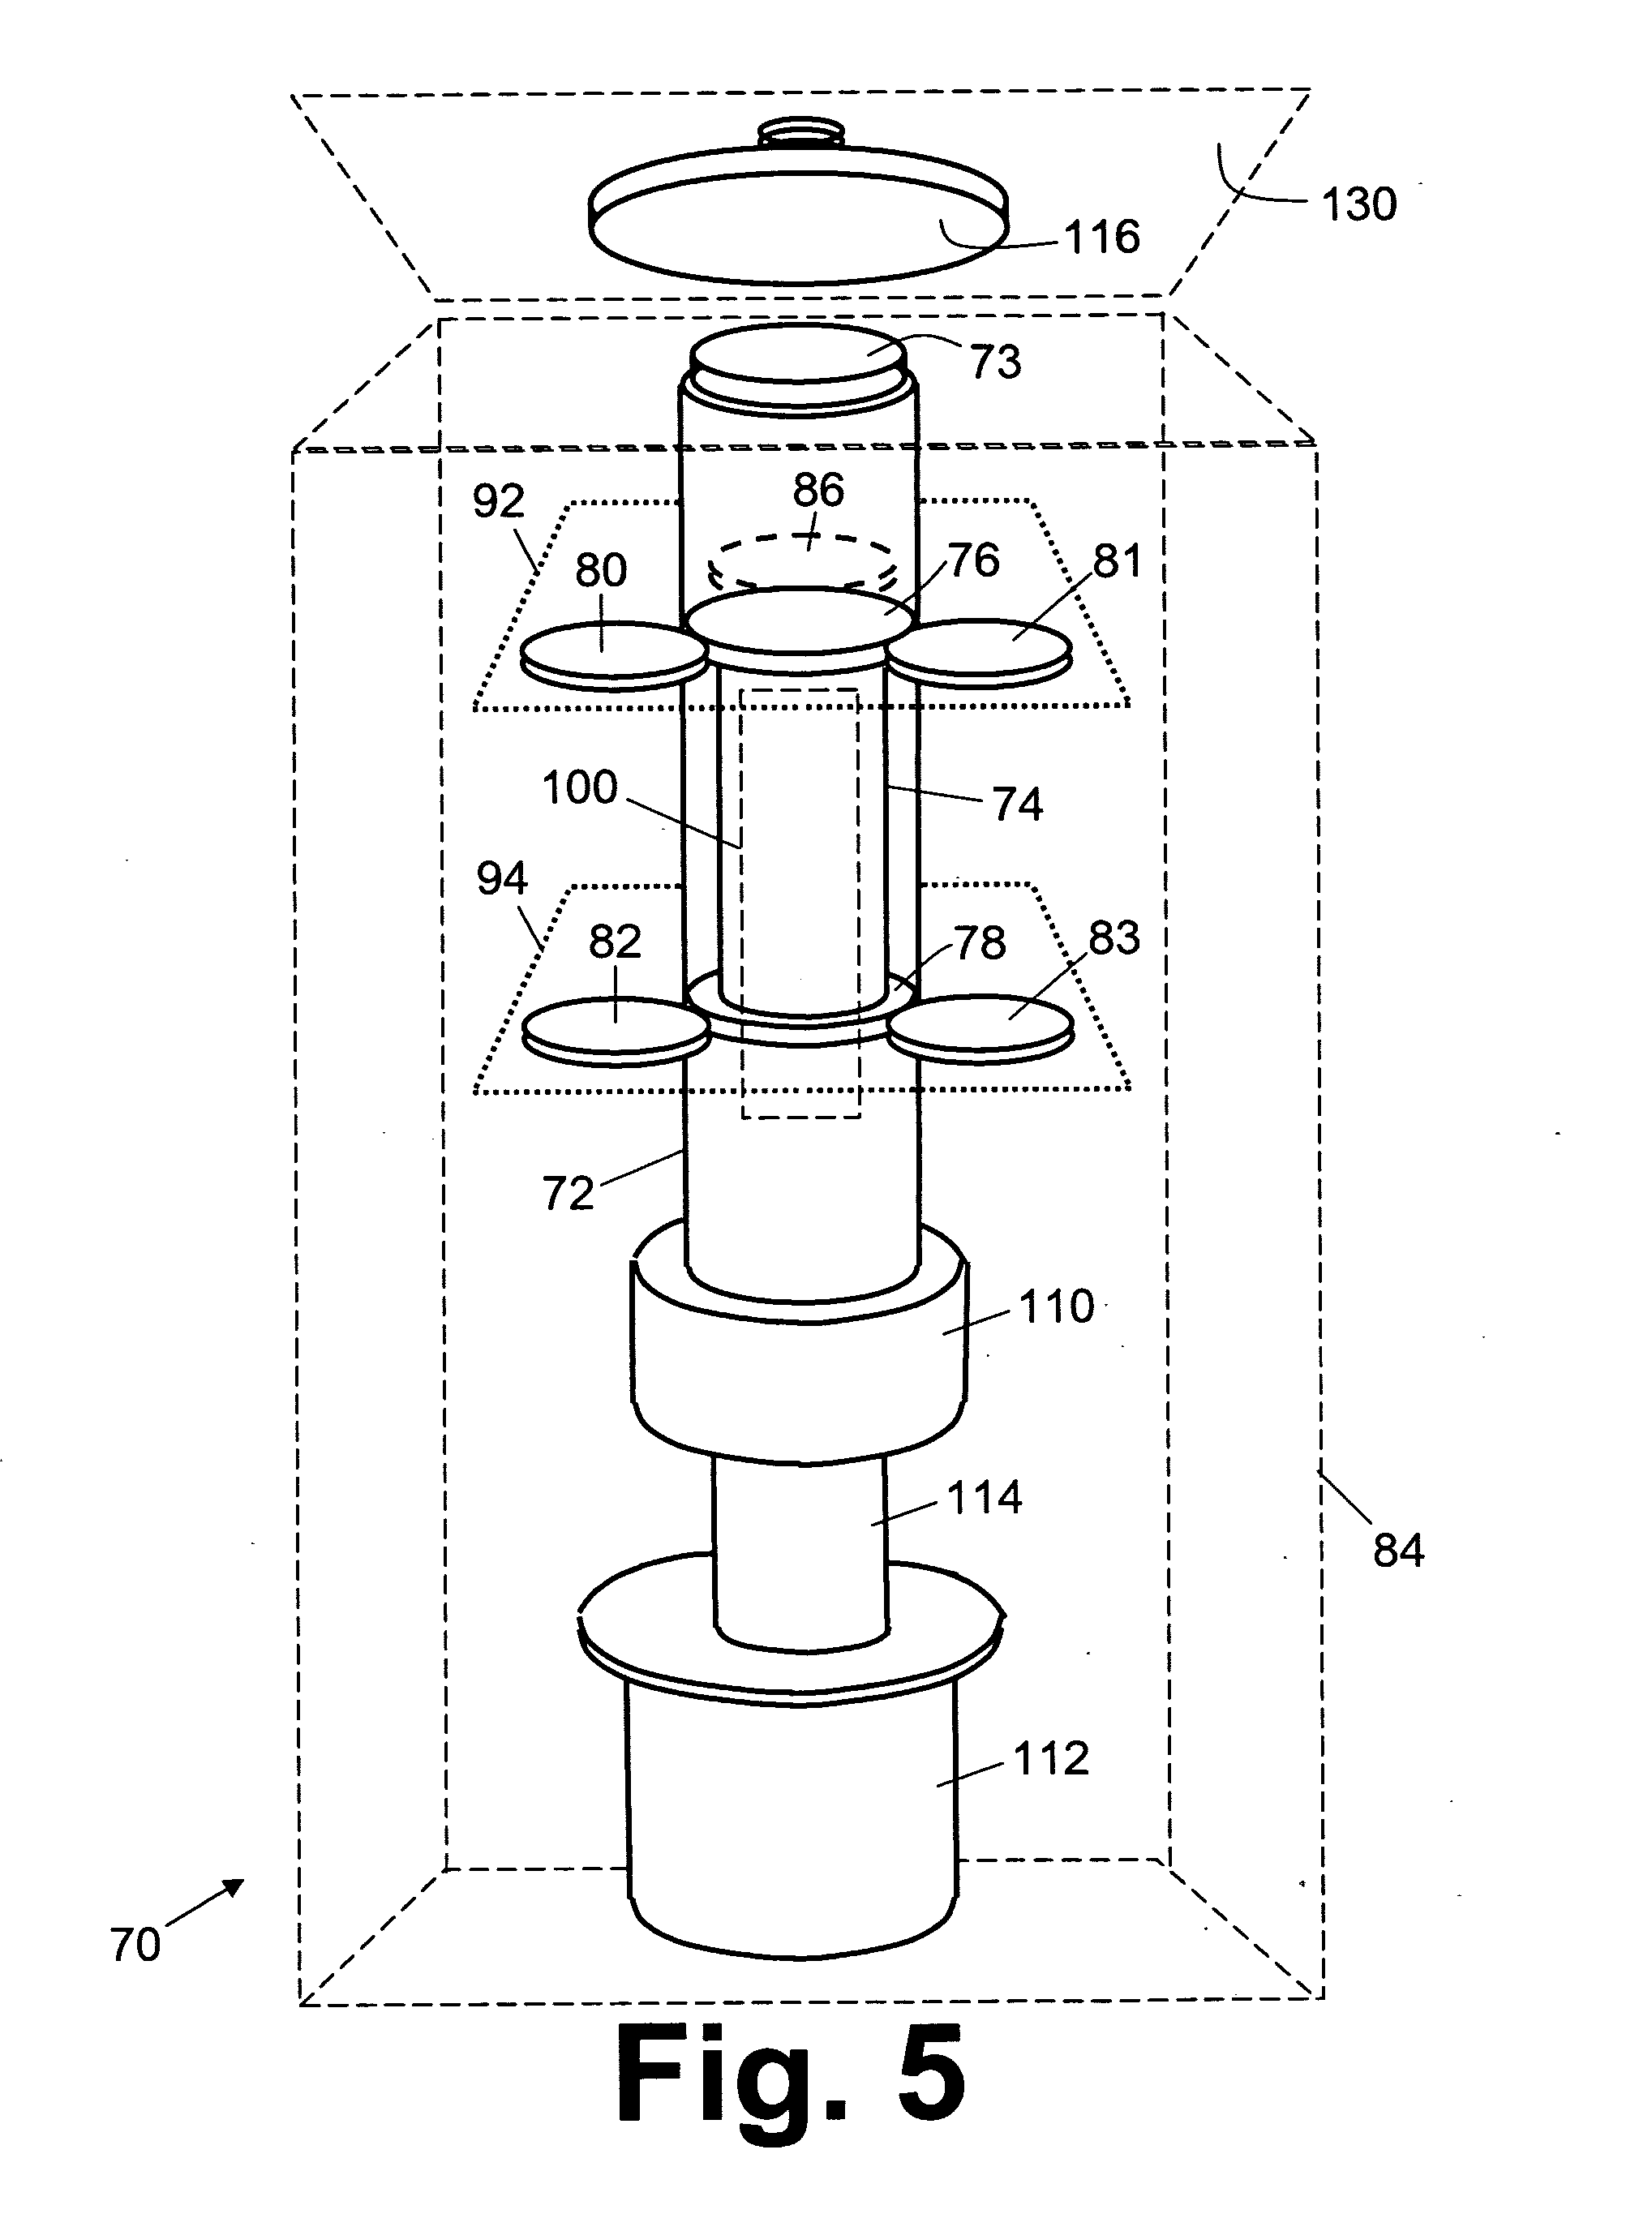 Method and apparatus for detection of rare cells